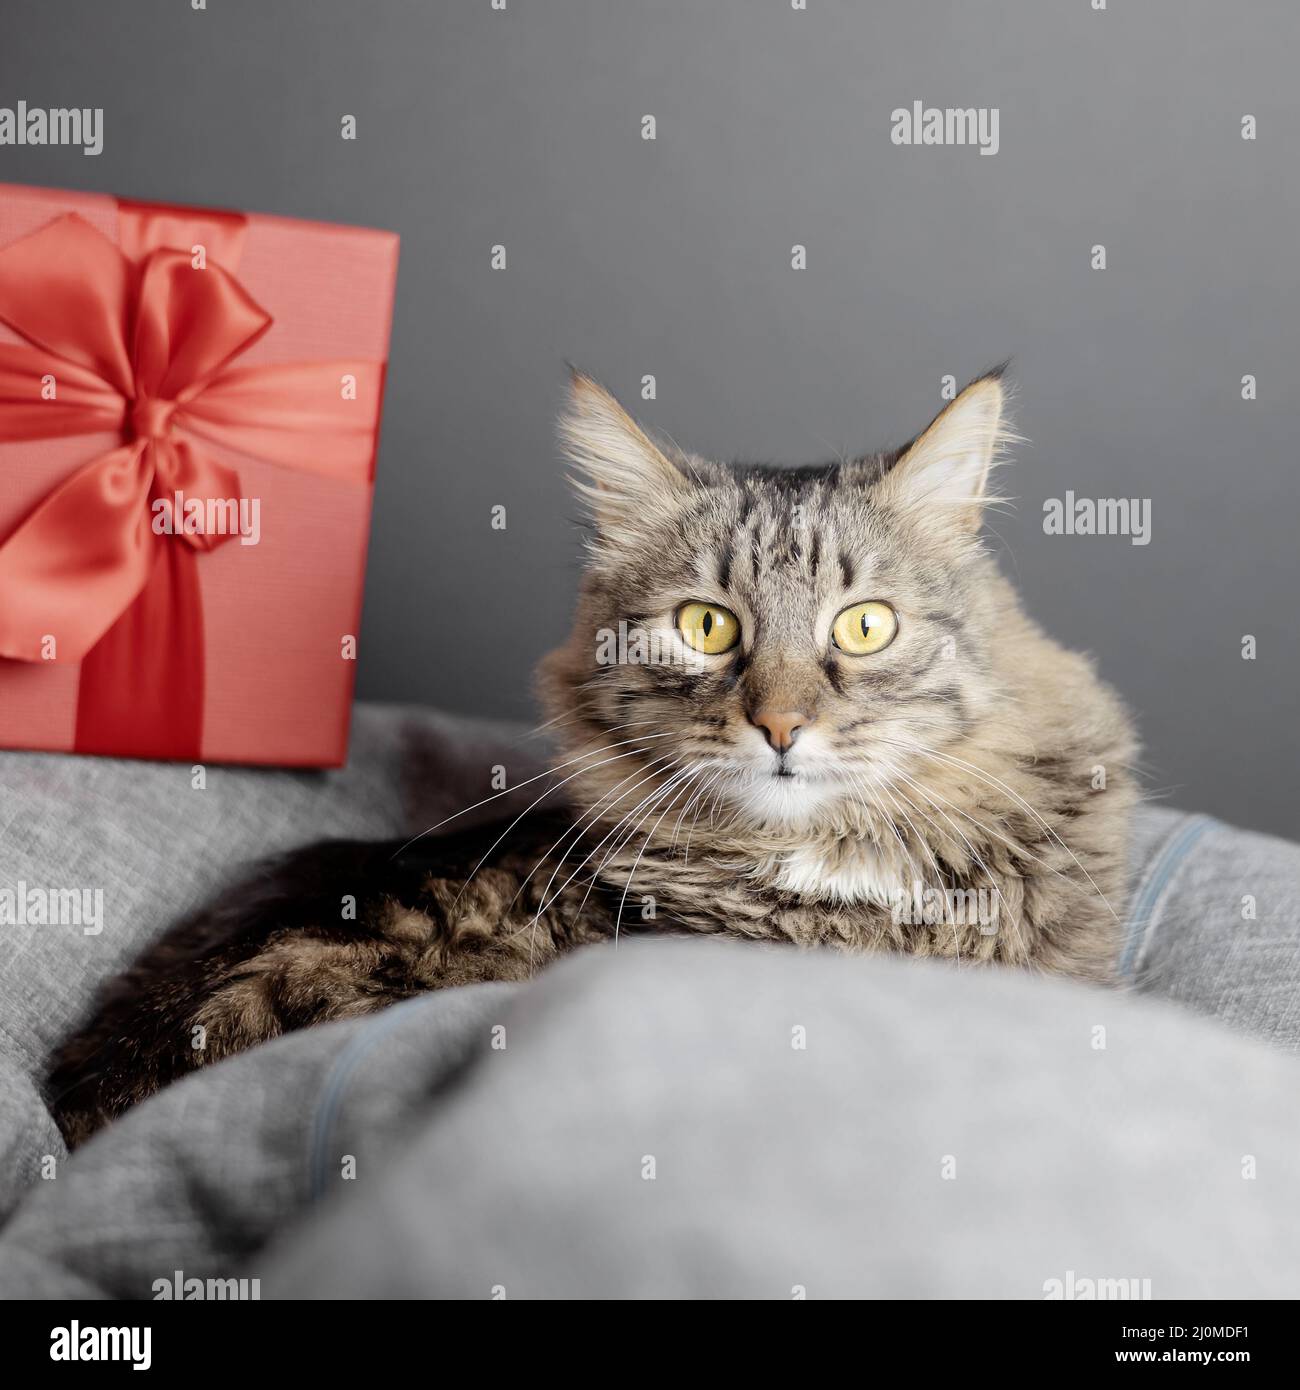 A cute domestic cat lies on a beanbag chair and looks directly against the background of a red gift box. Focus on the cat's face Stock Photo